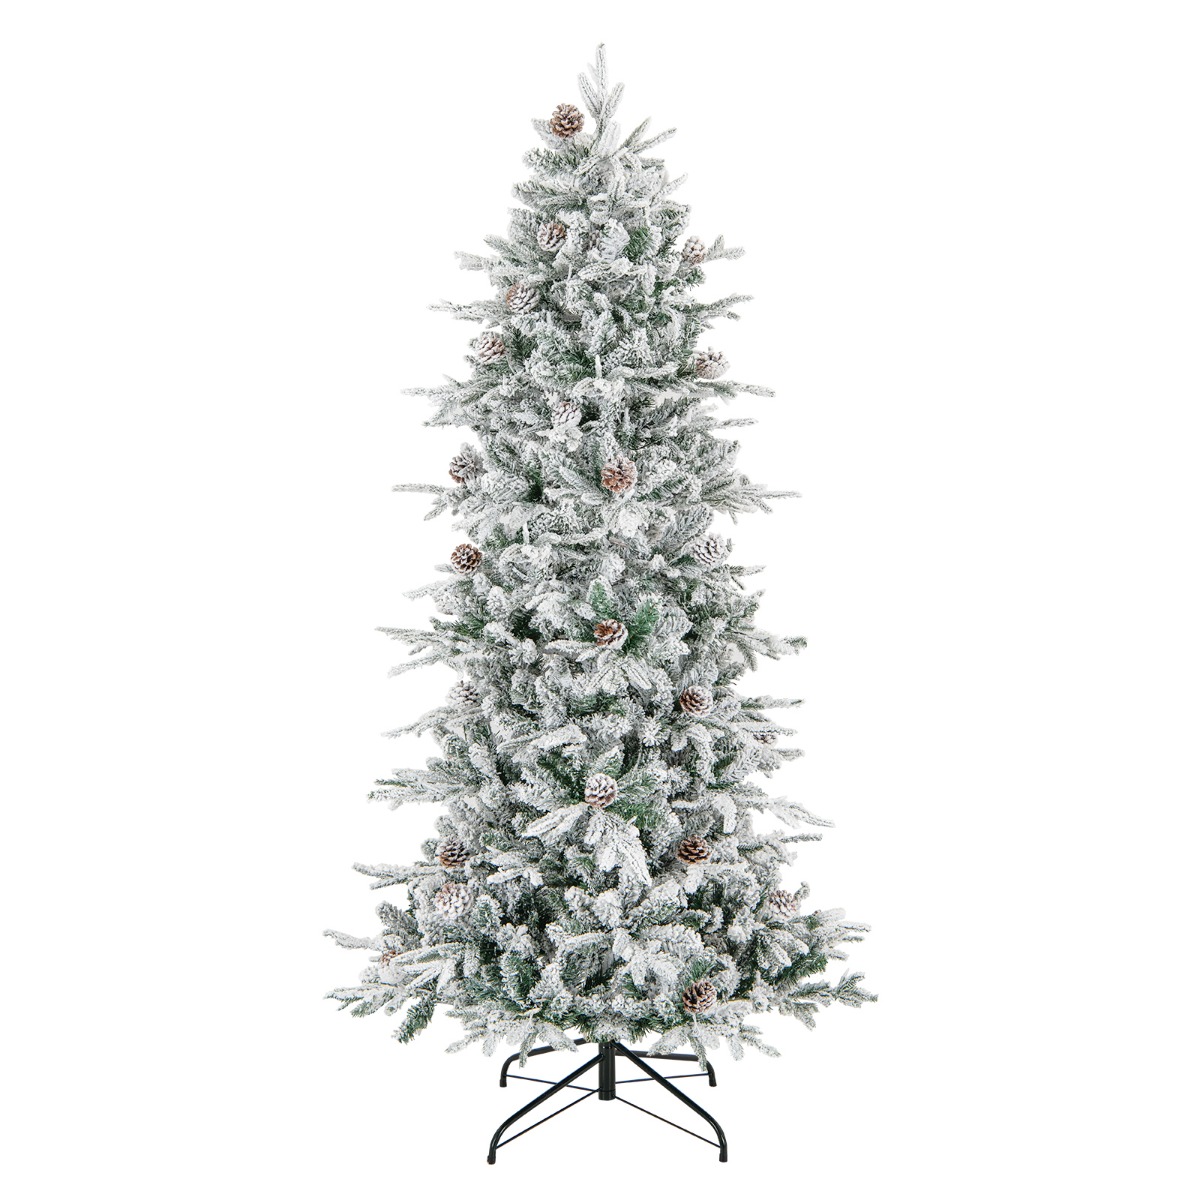 180 cm Artificial Xmas Tree with Flocked Branch Tips Natural Pine Cones Warm White Lights